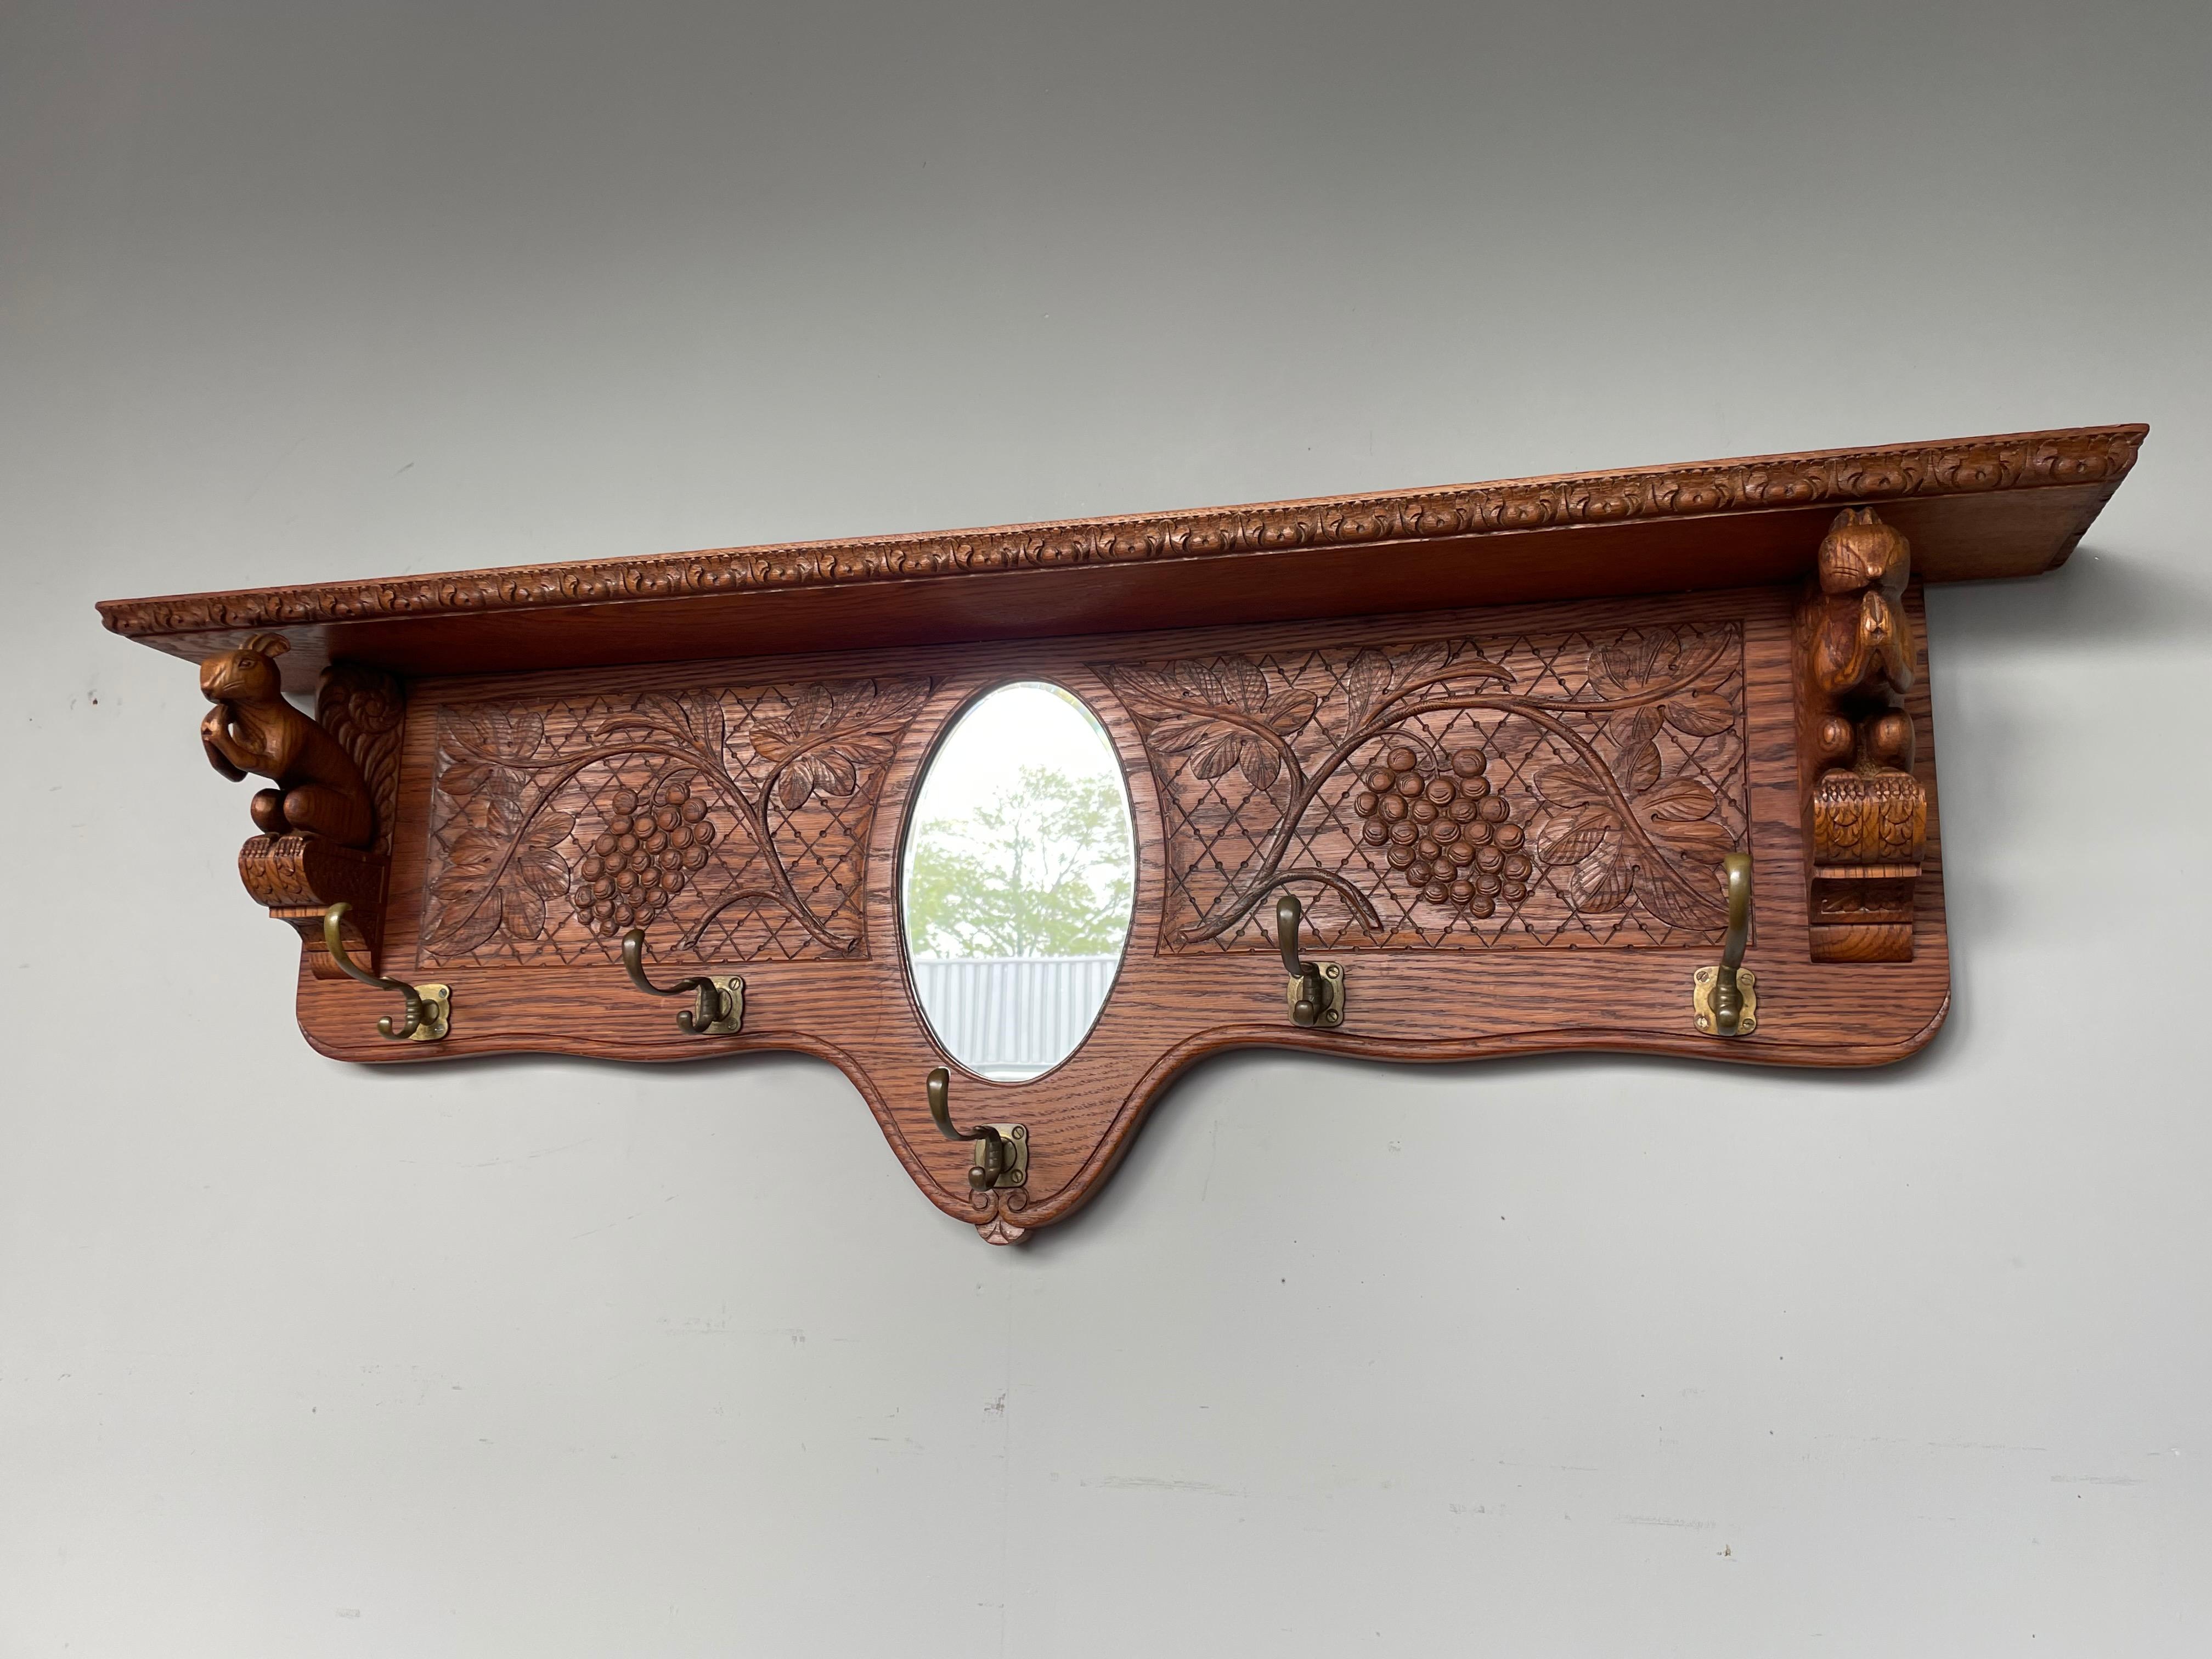 Beveled Antique Hand Carved Arts and Crafts Wall Coat Rack with Squirrel Sculptures